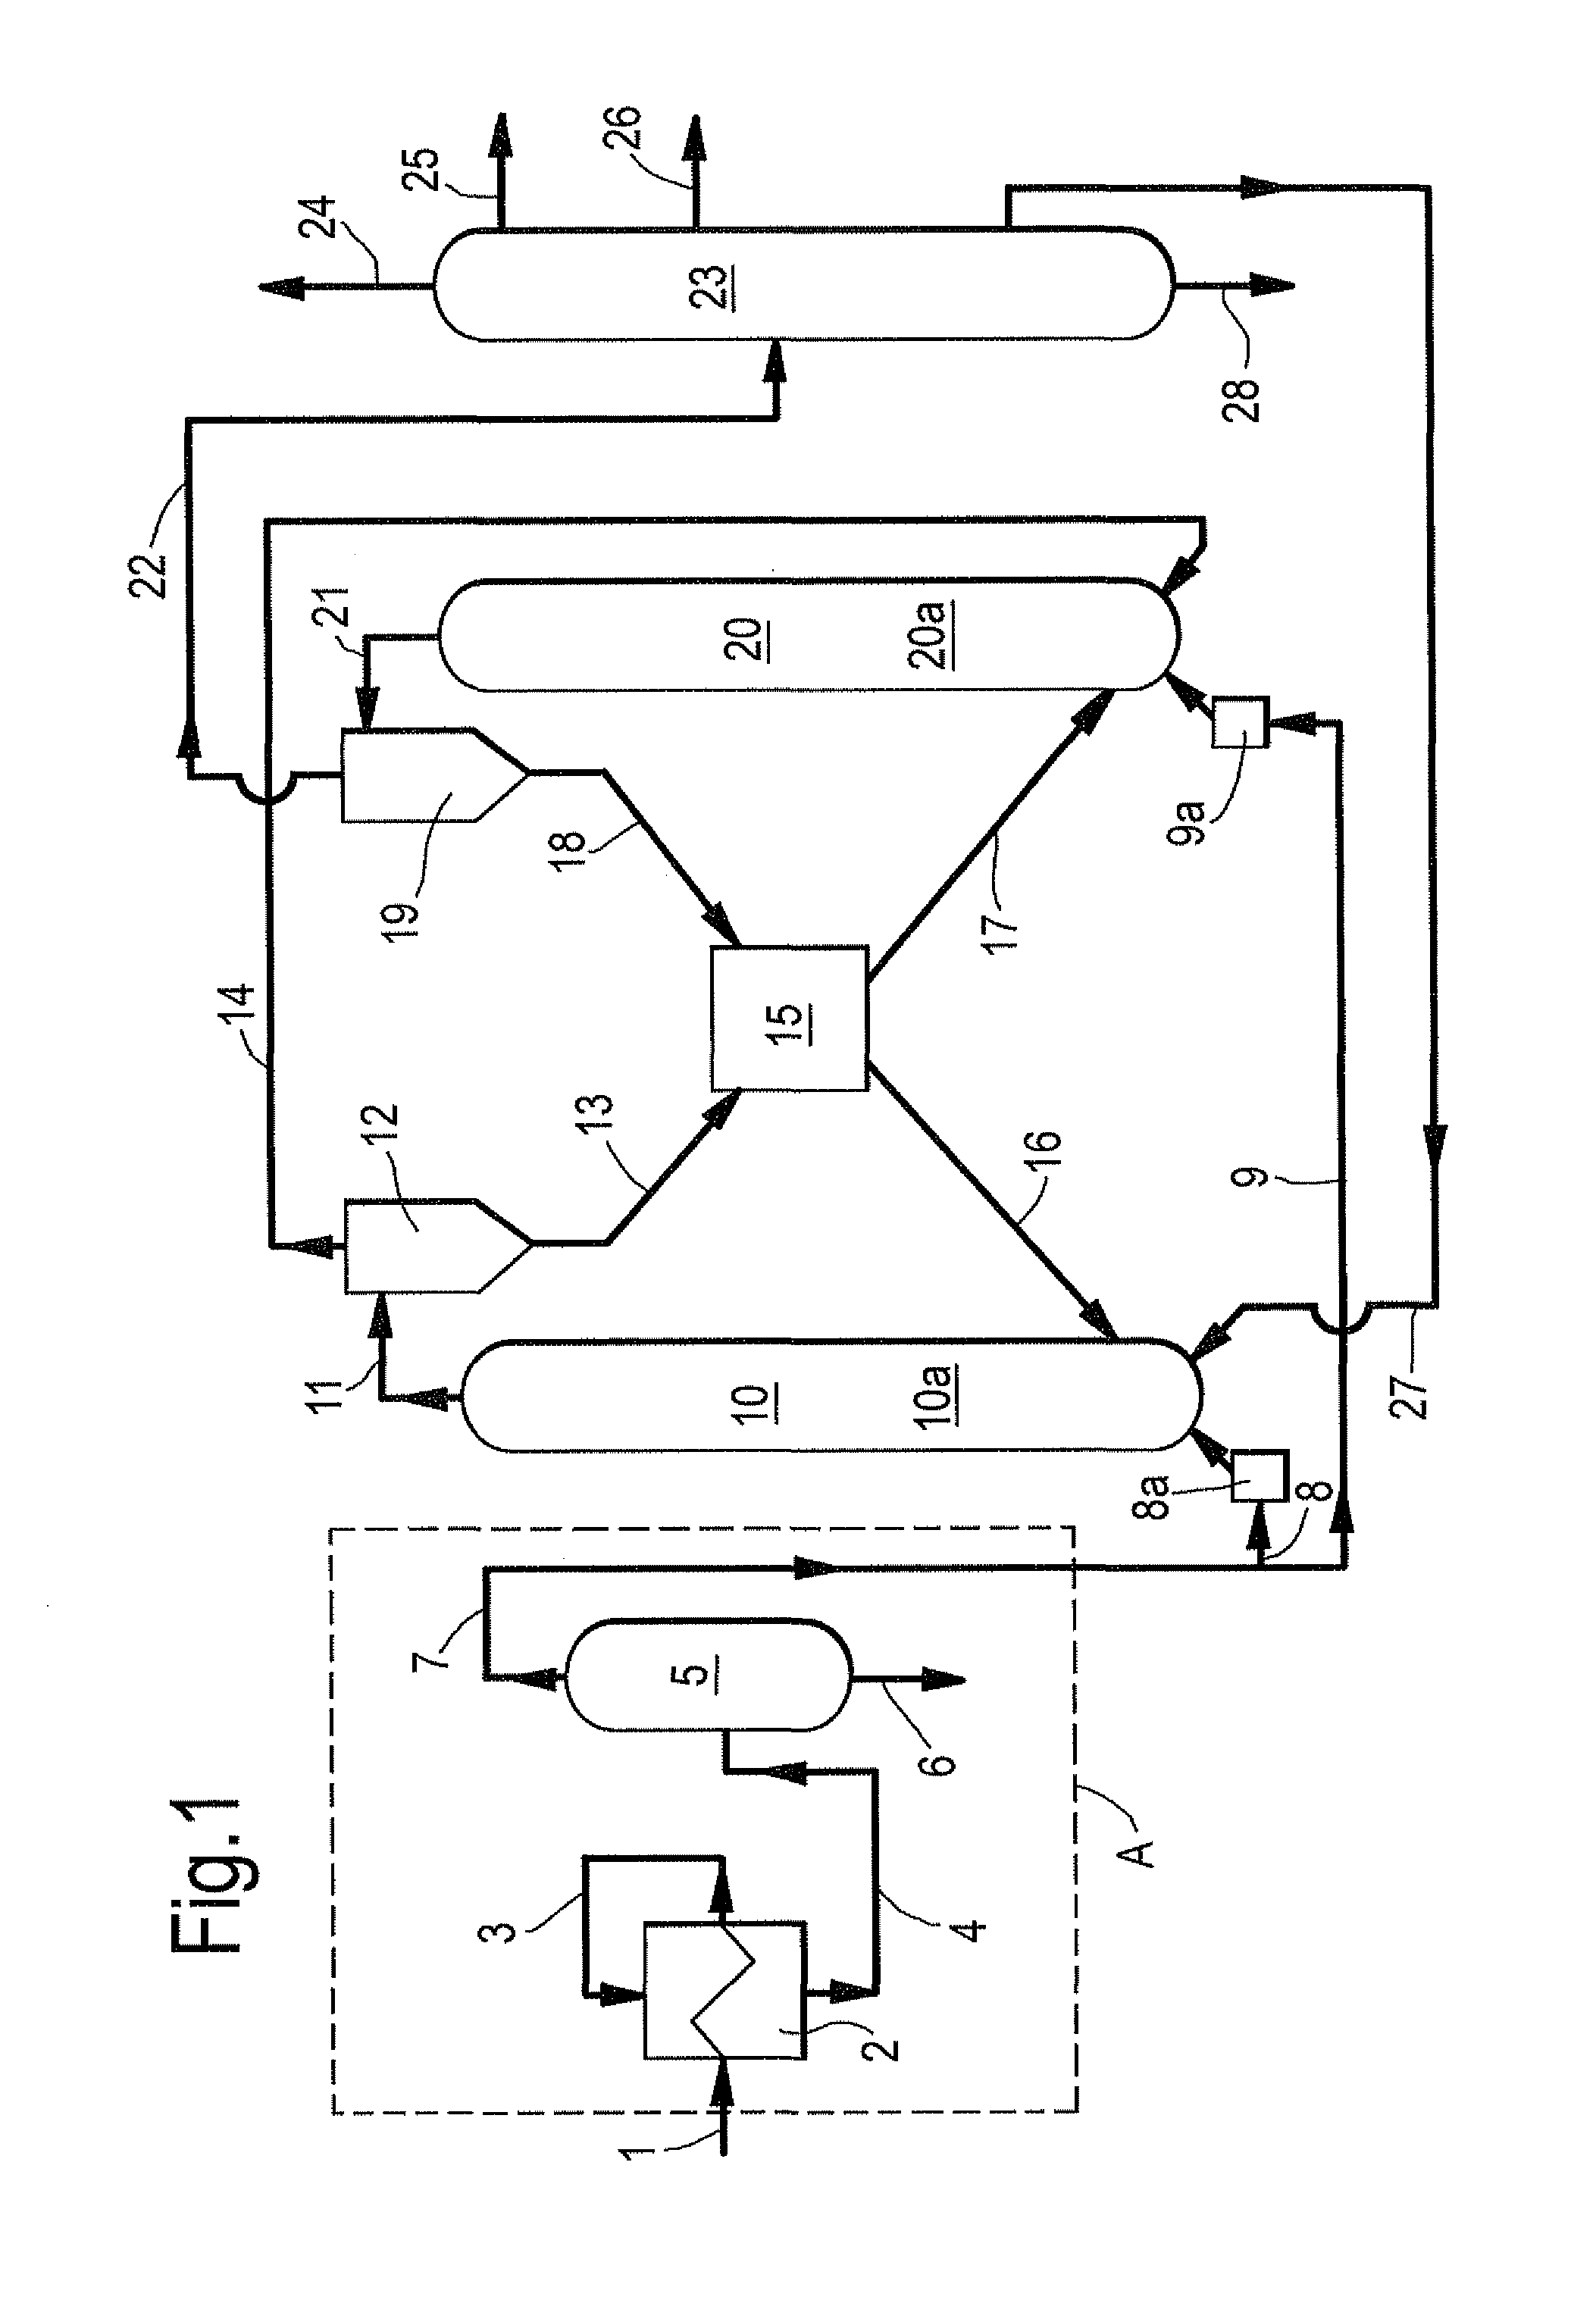 Process and reactor system for the preparation of an olefinic product